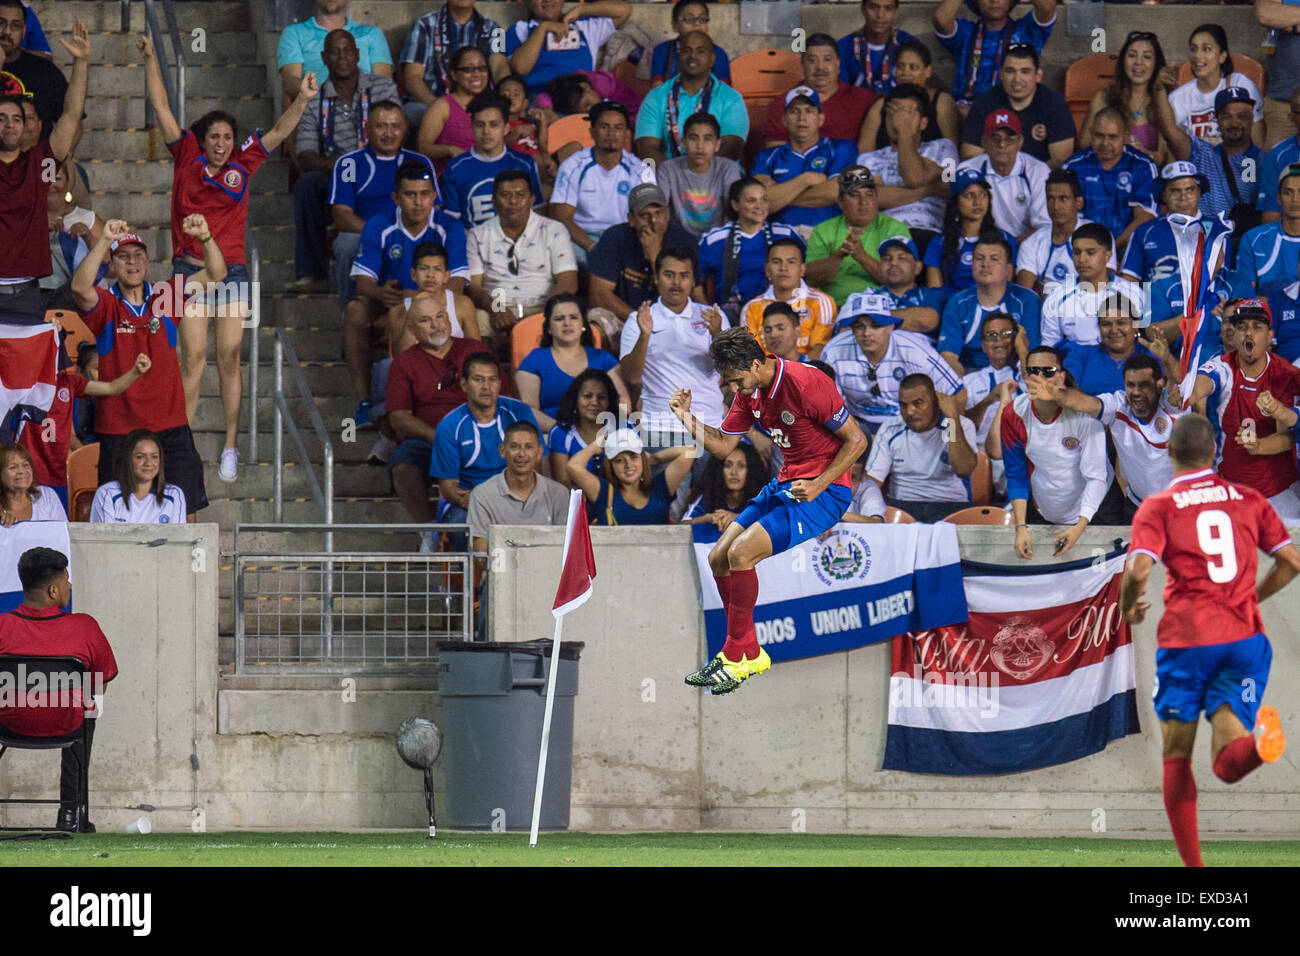 July 11, 2015: Costa Rica midfielder Bryan Ruiz (10) celebrates his goal during the 2nd half of an international CONCACAF Gold Cup soccer match between Costa Rica and El Salvador at BBVA Compass Stadium in Houston, TX. The game ended in a 1-1 draw. Credit:  Cal Sport Media/Alamy Live News Stock Photo